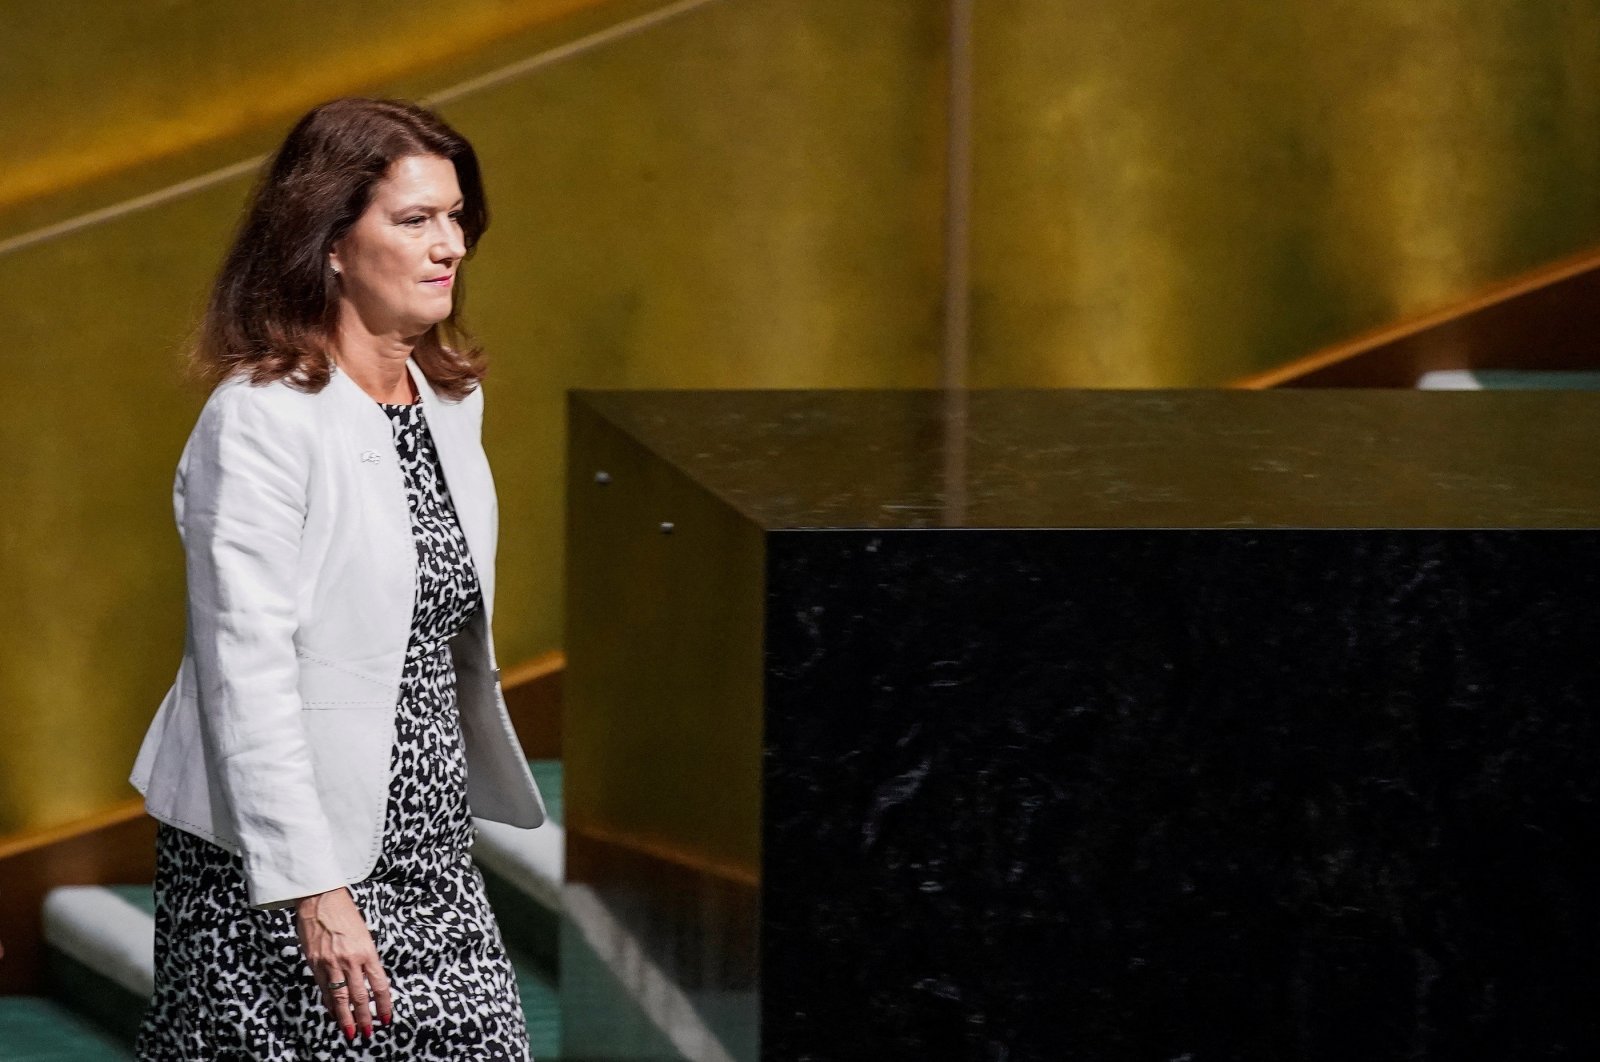 Sweden’s Minister for Foreign Affairs Ann Christin Linde attends the 77th Session of the United Nations General Assembly at U.N. Headquarters in New York City, U.S., Sept. 24, 2022. (REUTERS Photo)